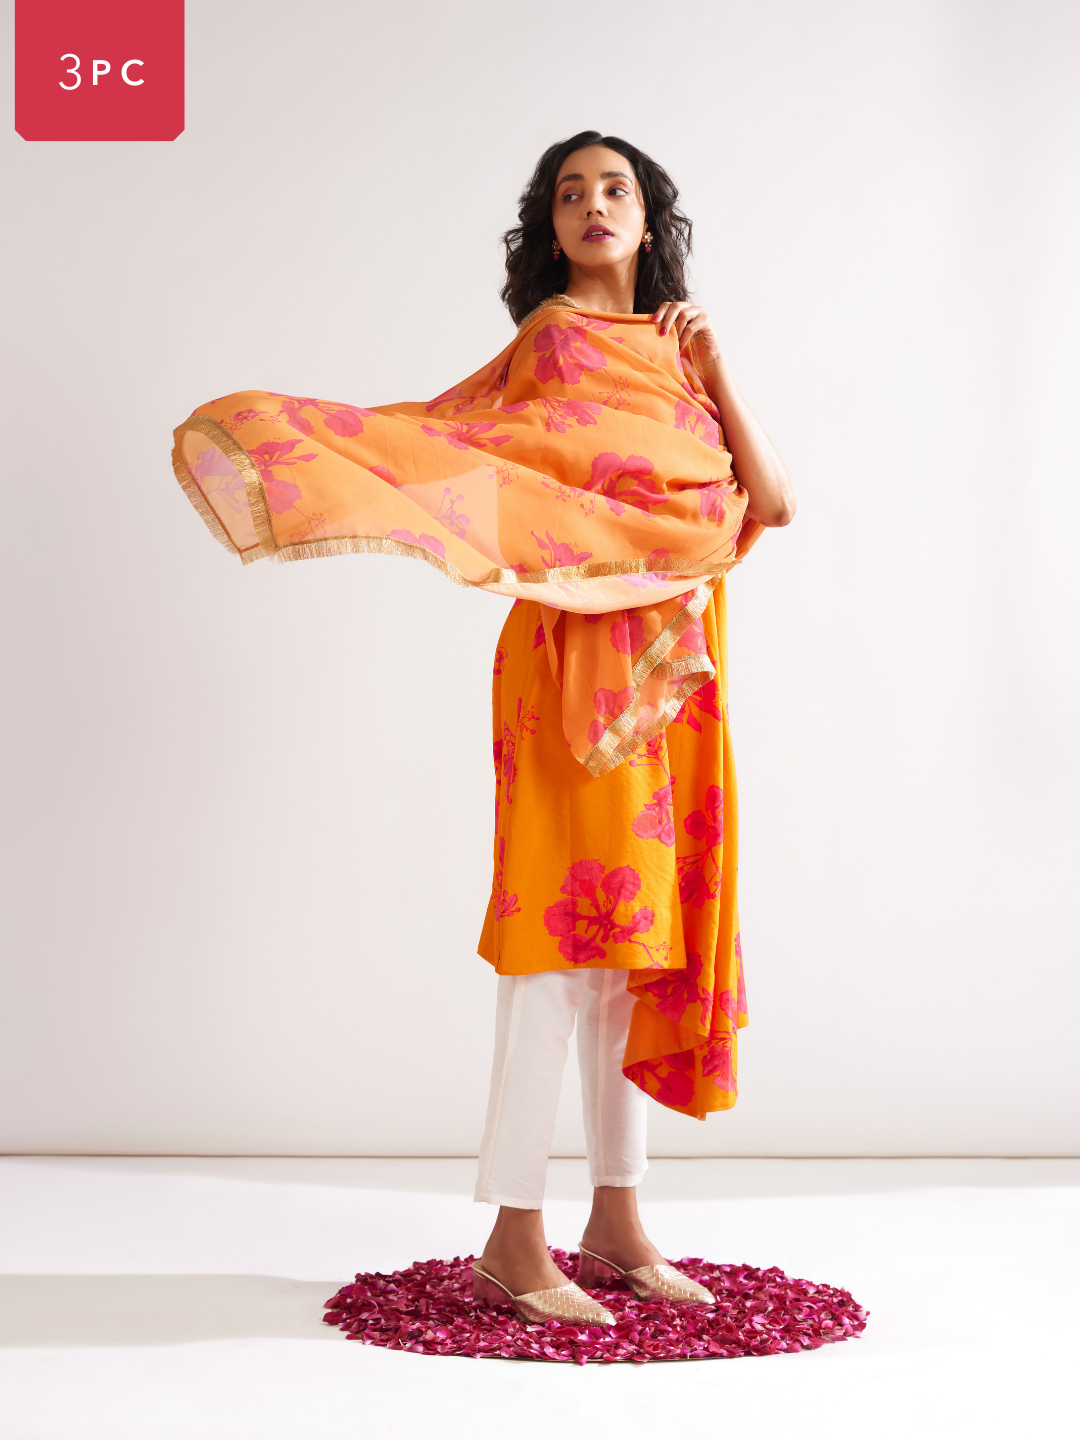 Asymmetrical Gulmohar kurta with cut out sleeves paired with pegged pants along with dupatta- Spicy orange